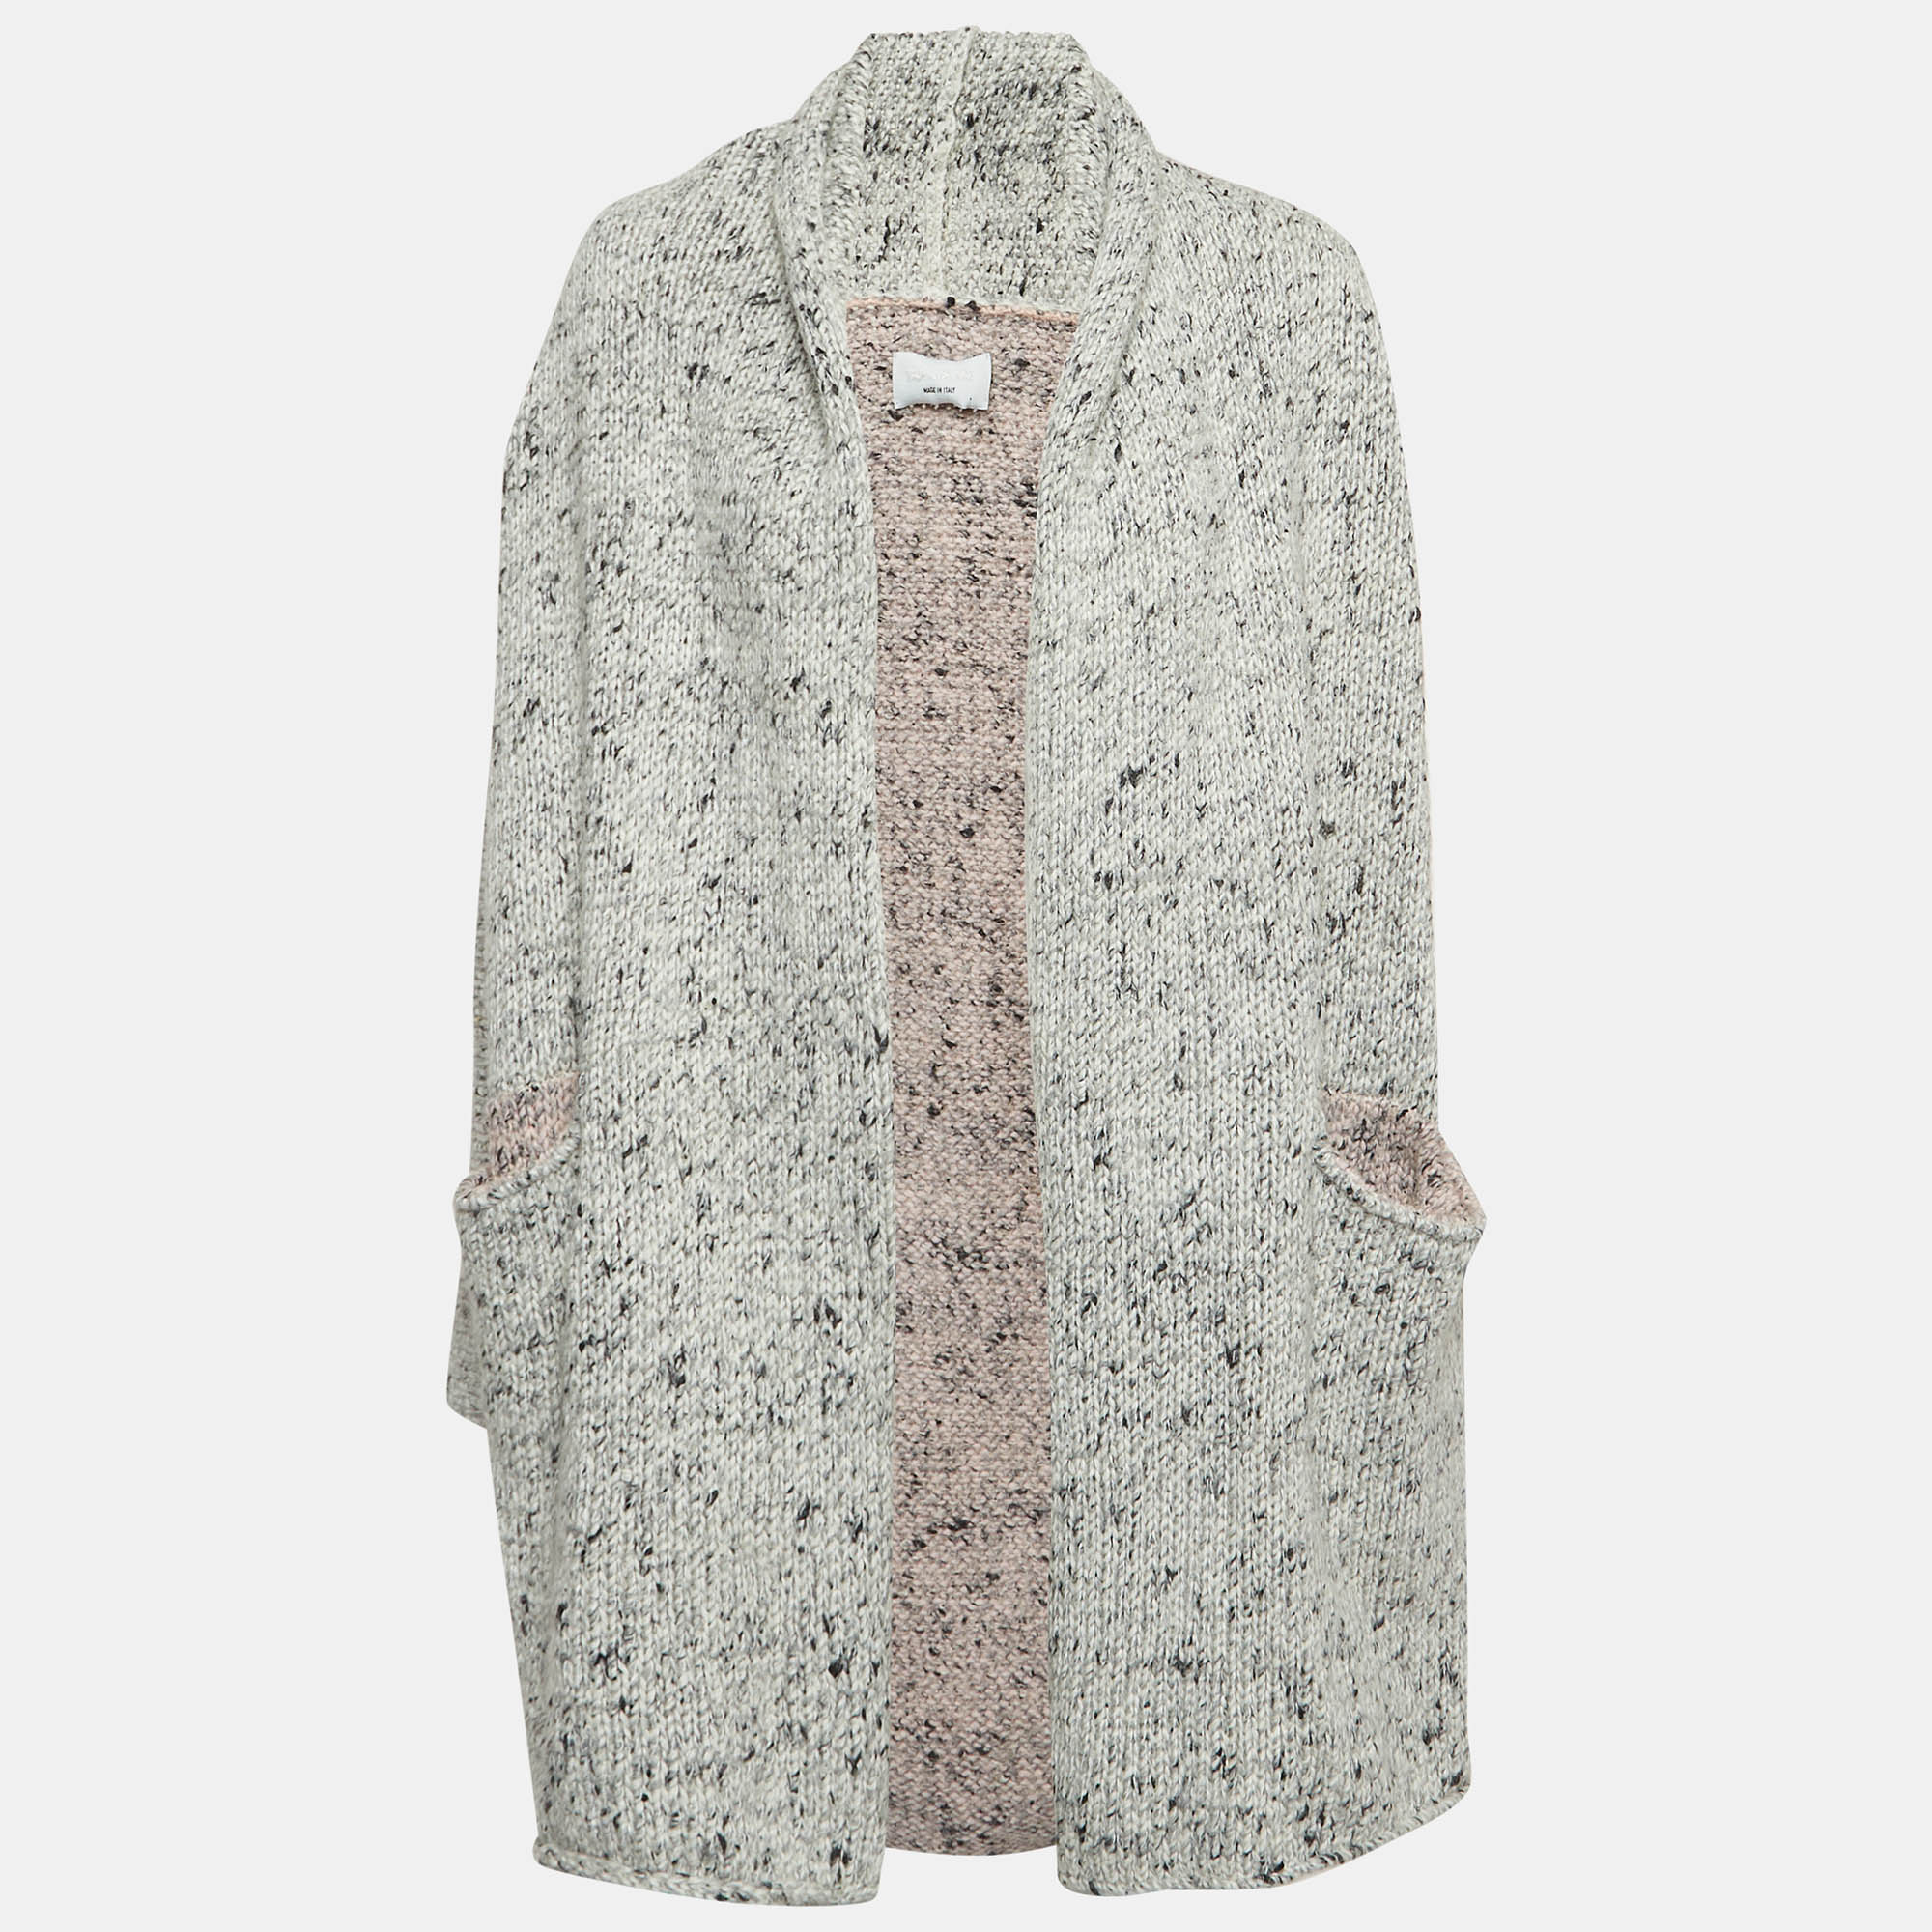 

Zadig & Voltaire Grey/Pink Rib Knit Open Cardigan XS/S